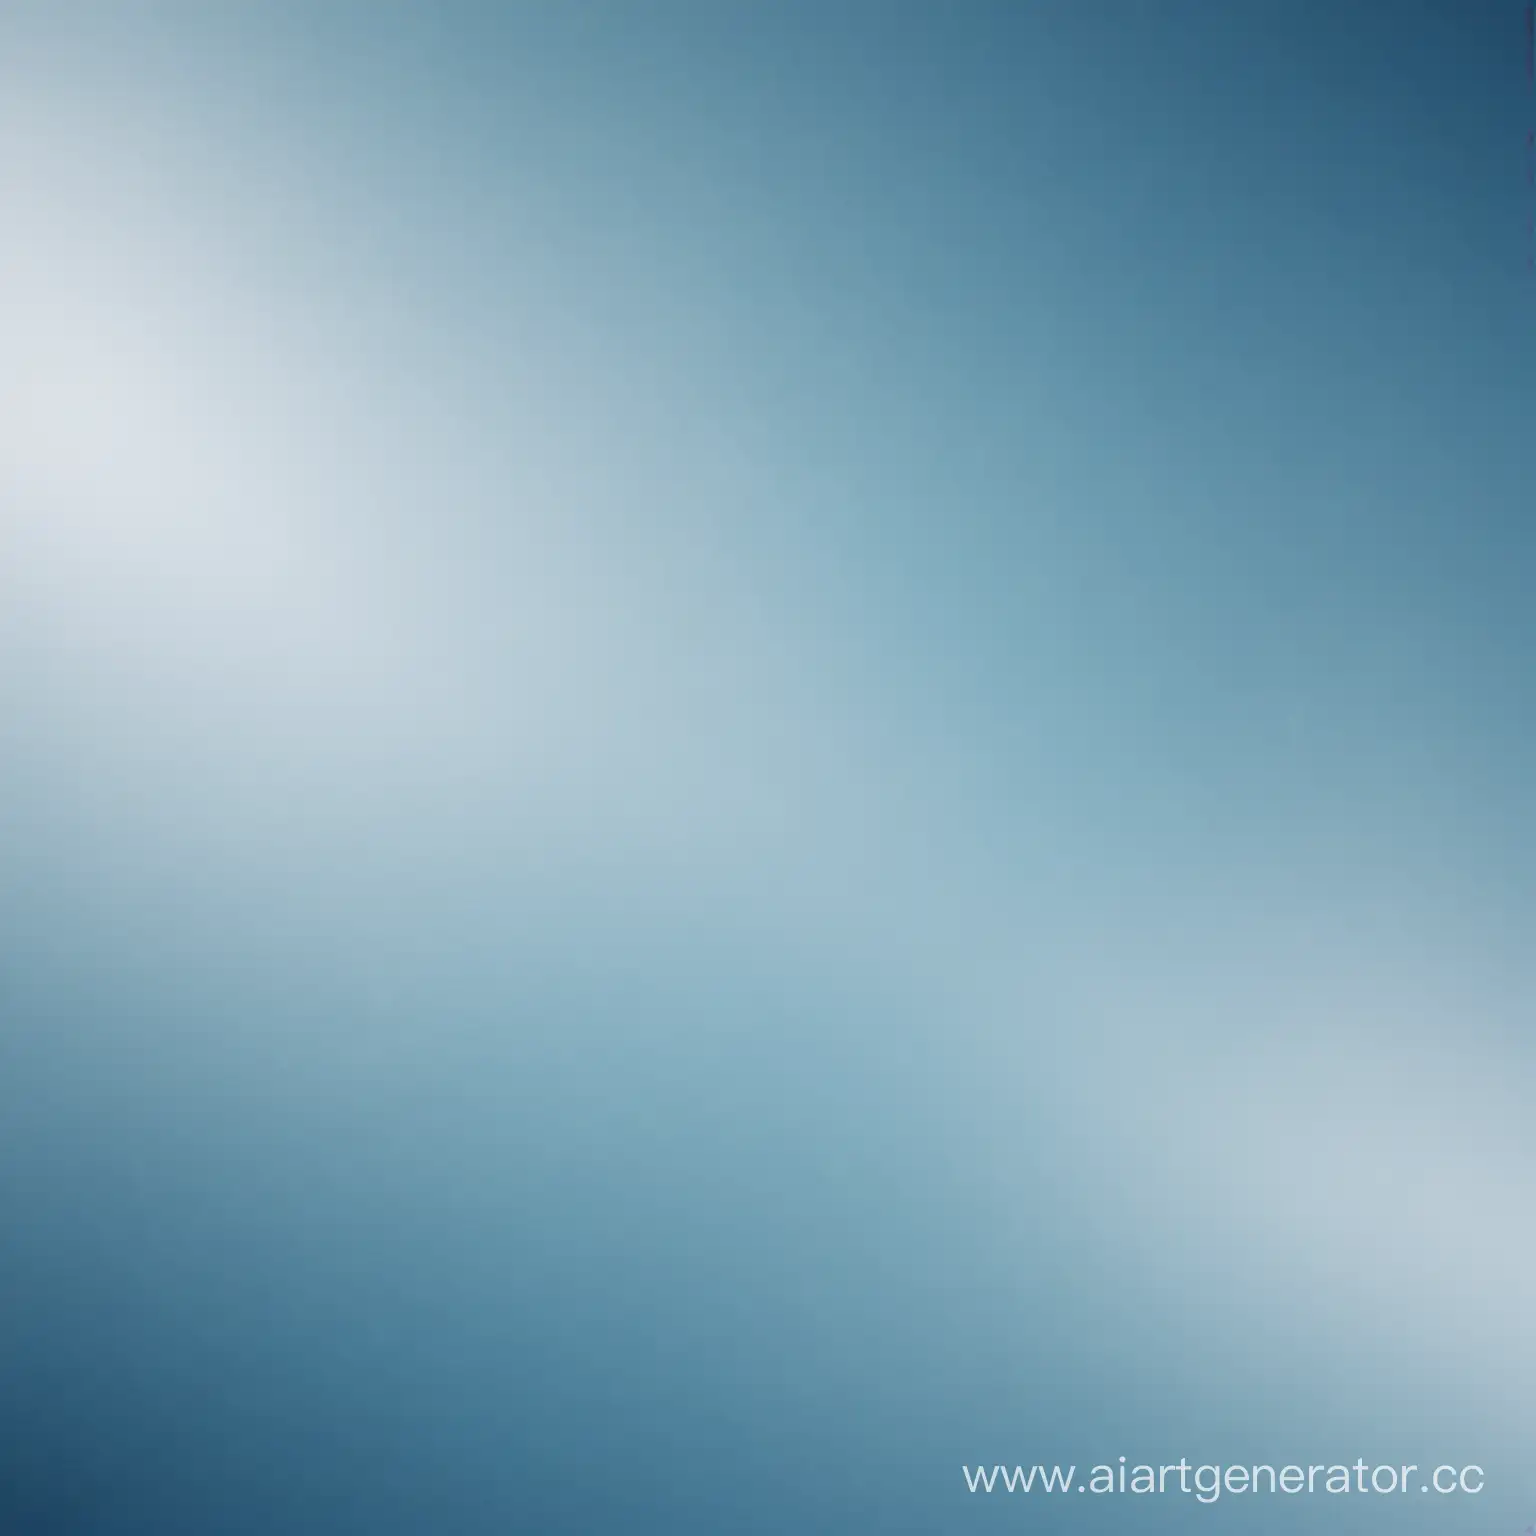 Blurred-Blue-Background-with-Soft-Gradient